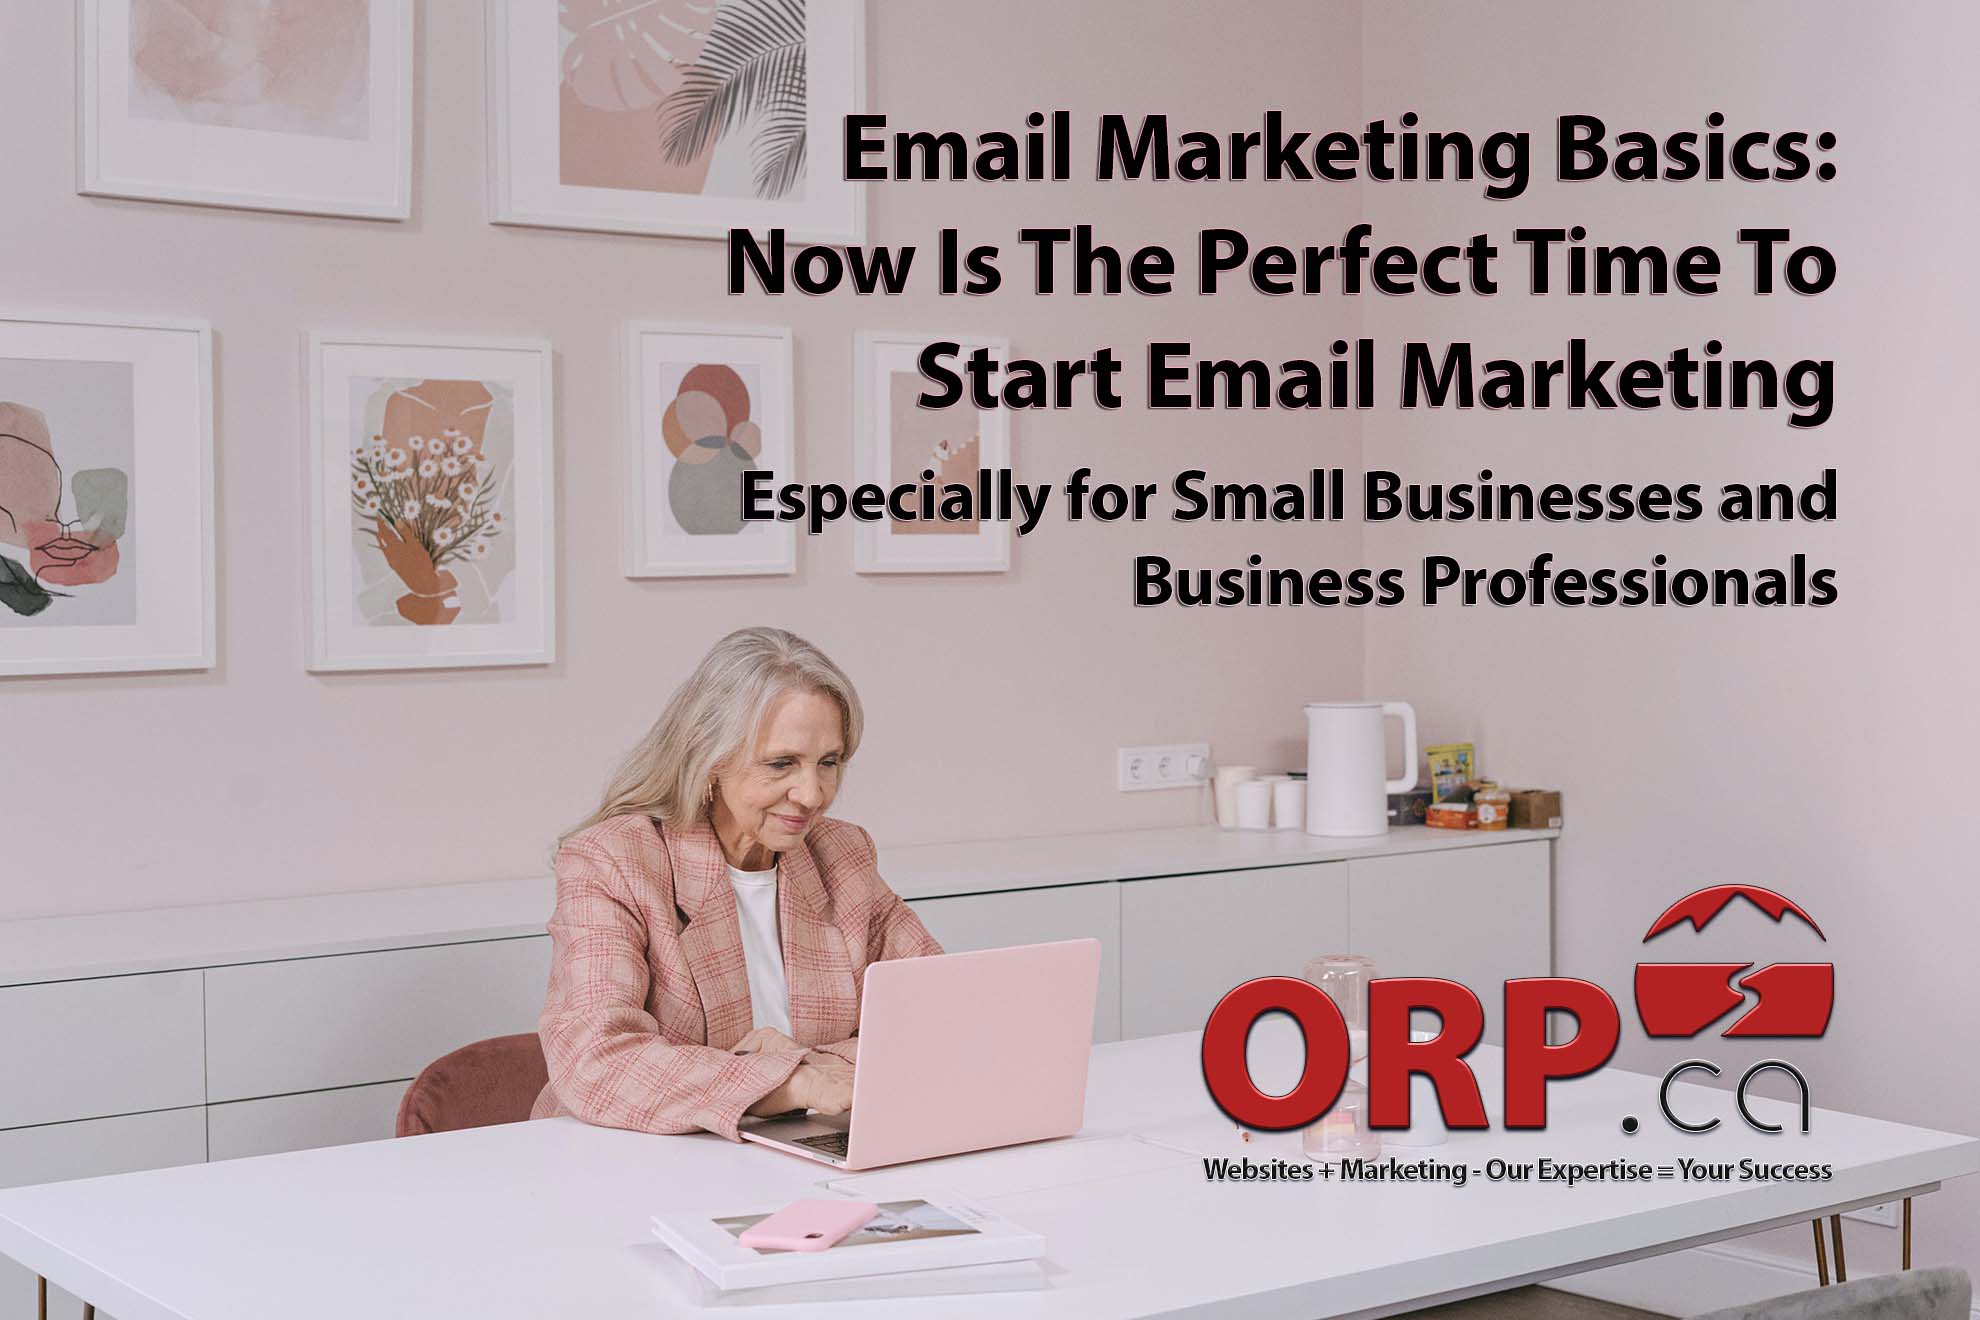 Email Marketing Basic Now Is The Perfect Time To Start Email Marketing from ORP.ca Websites + Marketing - Our Expertise + your Success - Services for Small Business and Business Professionals